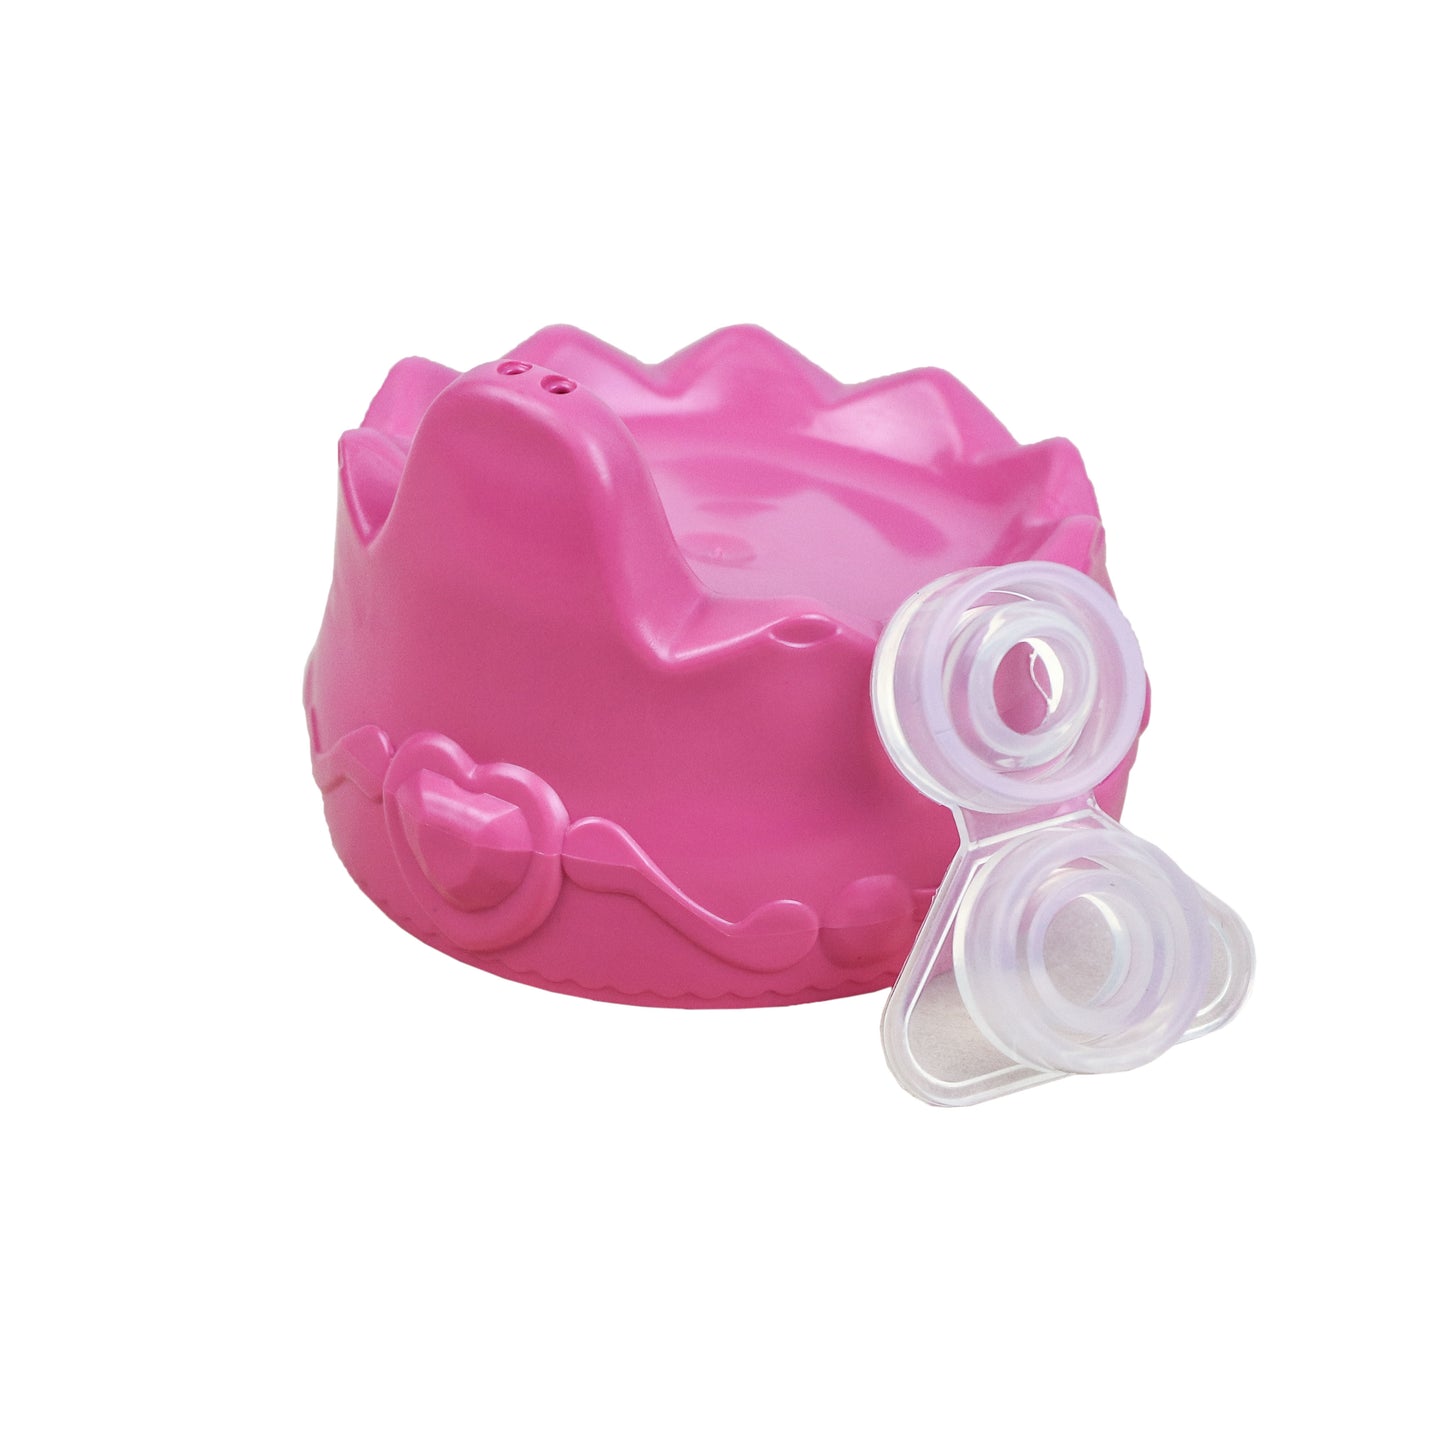 Re-Play Non-Spill Sippy Cup - Princess